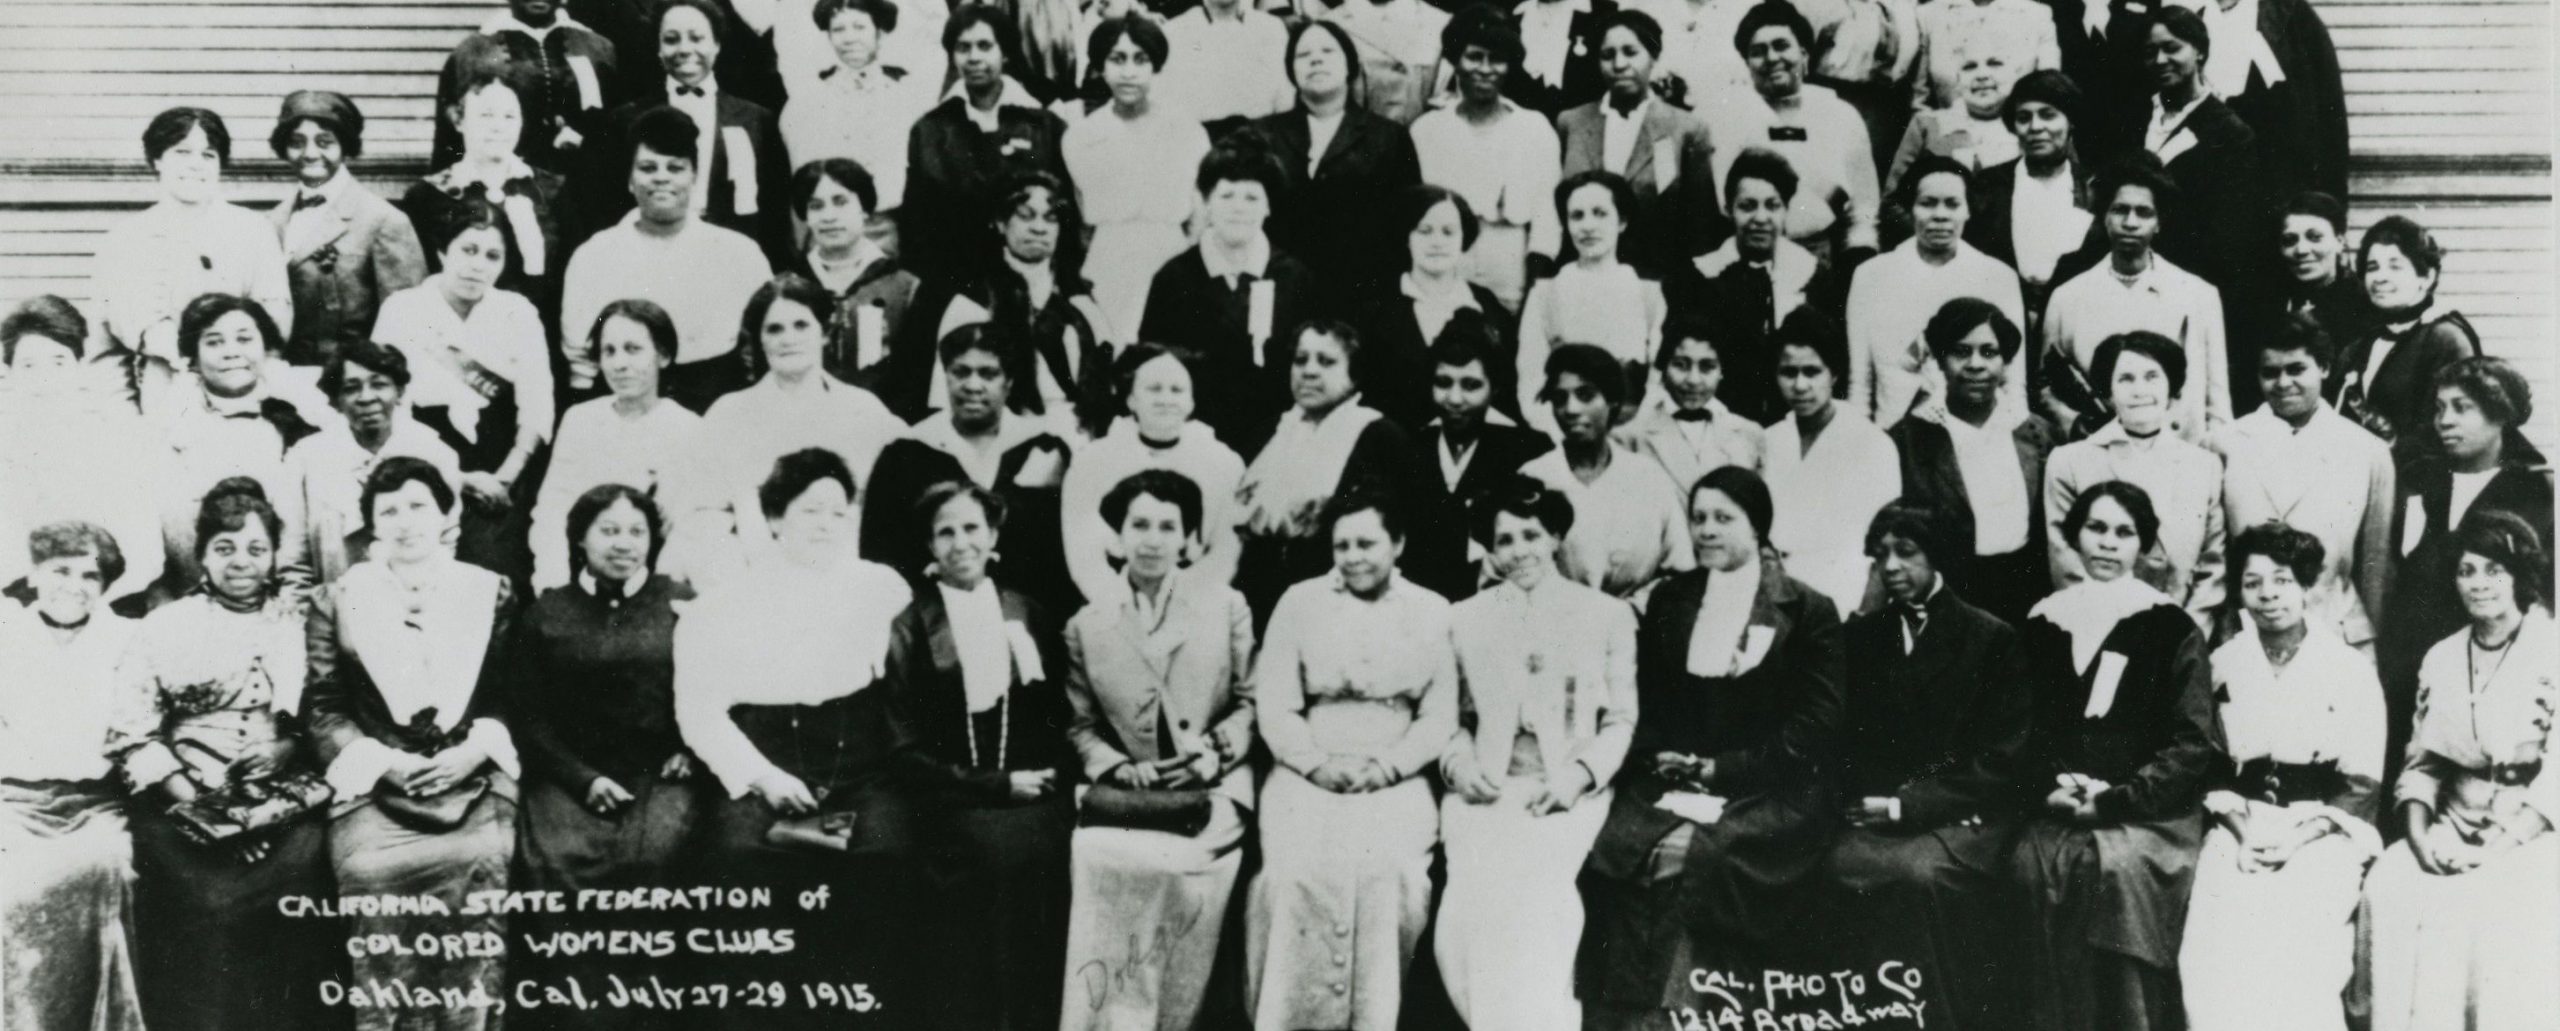 Group portrait taken on stairs outside of building of the California State Federation of Colored Women’s Club dated 1915. Five rows of women, both seated and standing are crowded into the picture.